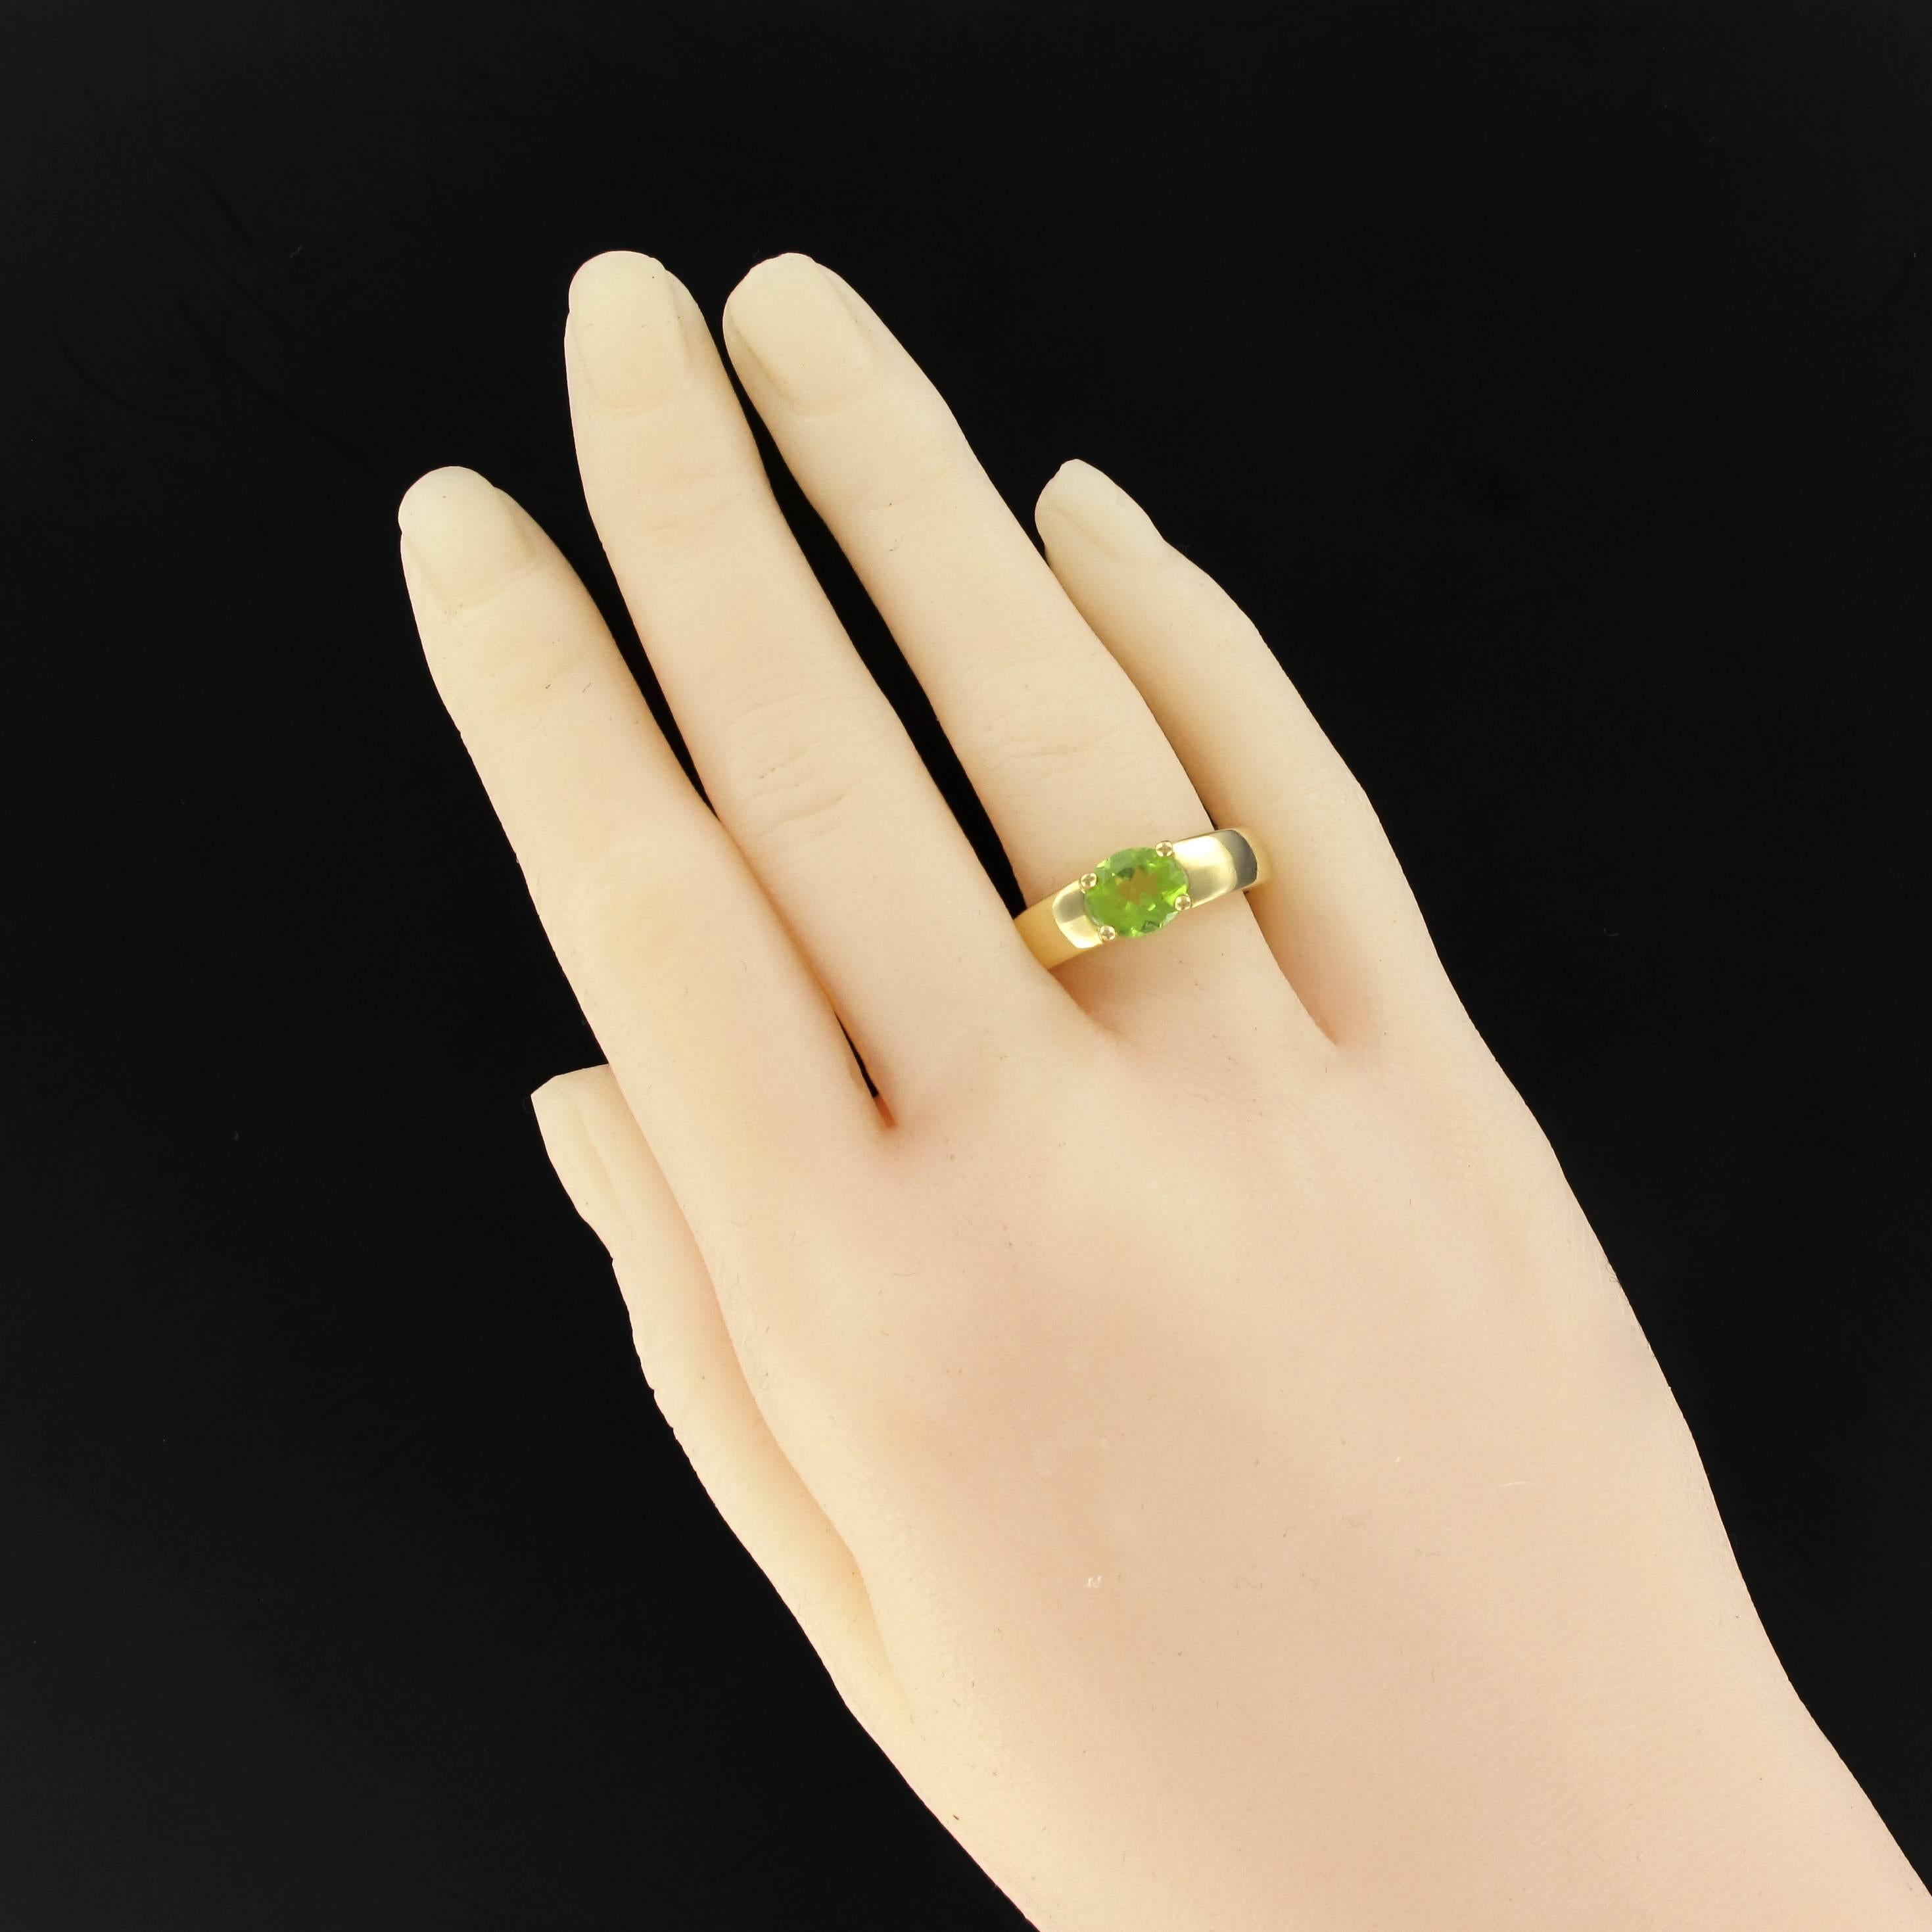 Ring in 18 karats yellow gold, eagle's head hallmark.
Bangle ring, it is set with 4 claws on the top of a faceted oval peridot.
Total weight peridot: about 1.30 carat.
Length: 6.8 mm, Width: 7.7 mm, Height: 6 mm, Width of the ring: 4.7 mm.
Total